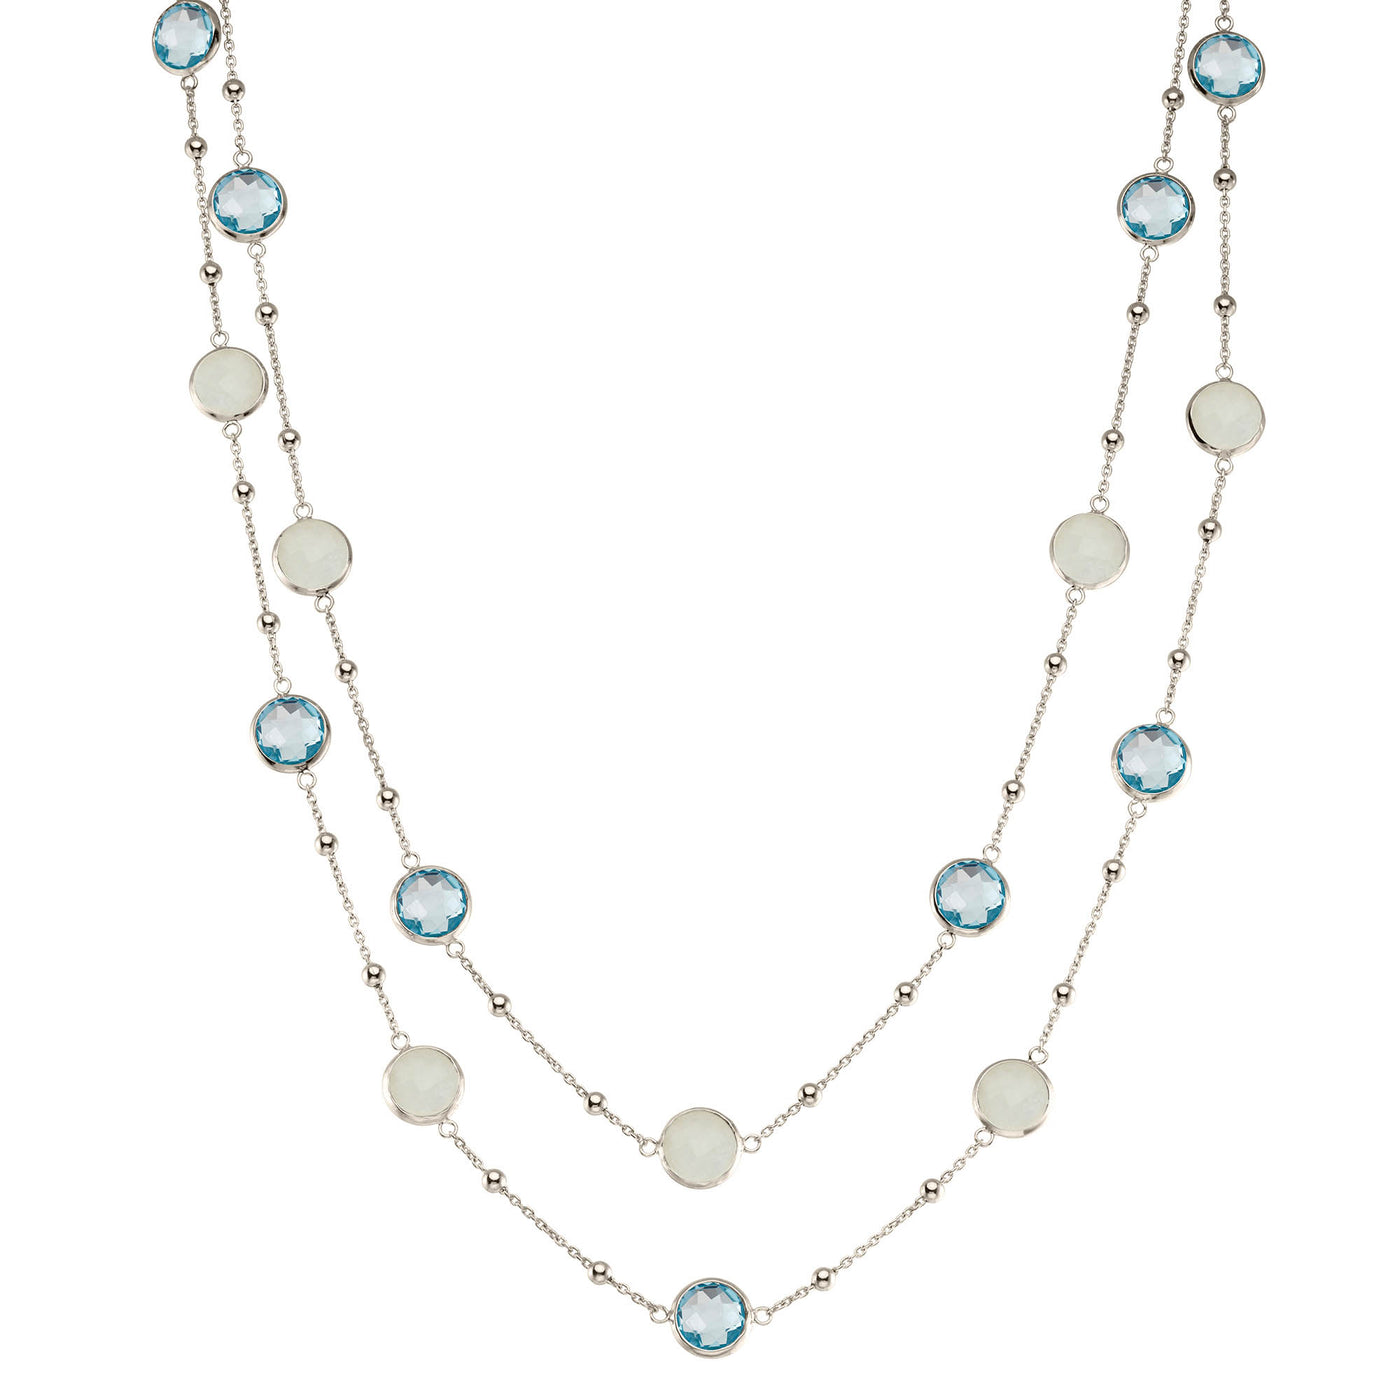 Rebecca Sloane Silver Necklace With Multiple Round Gemstones